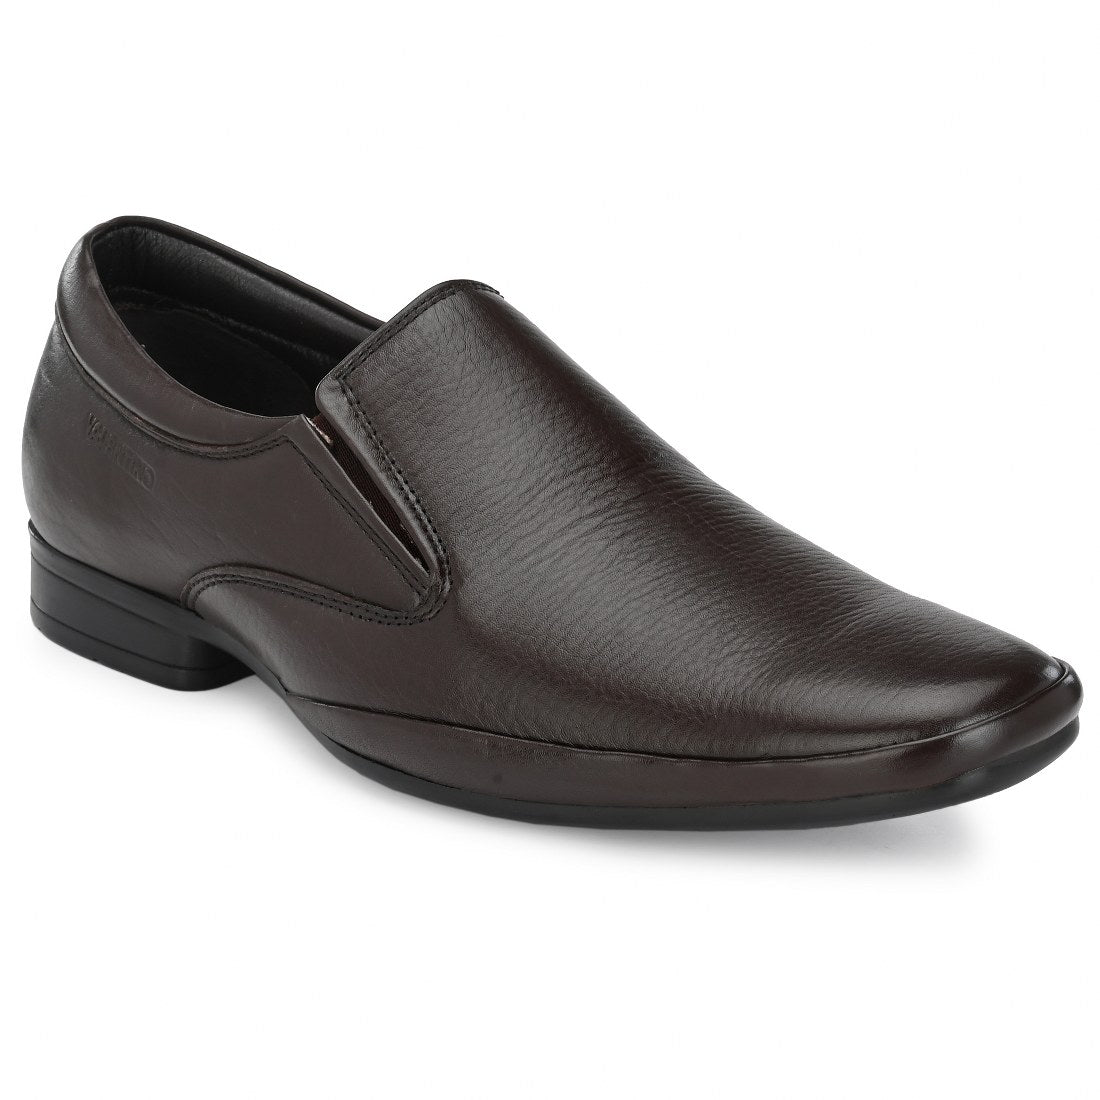 CALIFORNIA-02A MEN LEATHER BROWN FORMAL SLIP ON MOCCASSINS